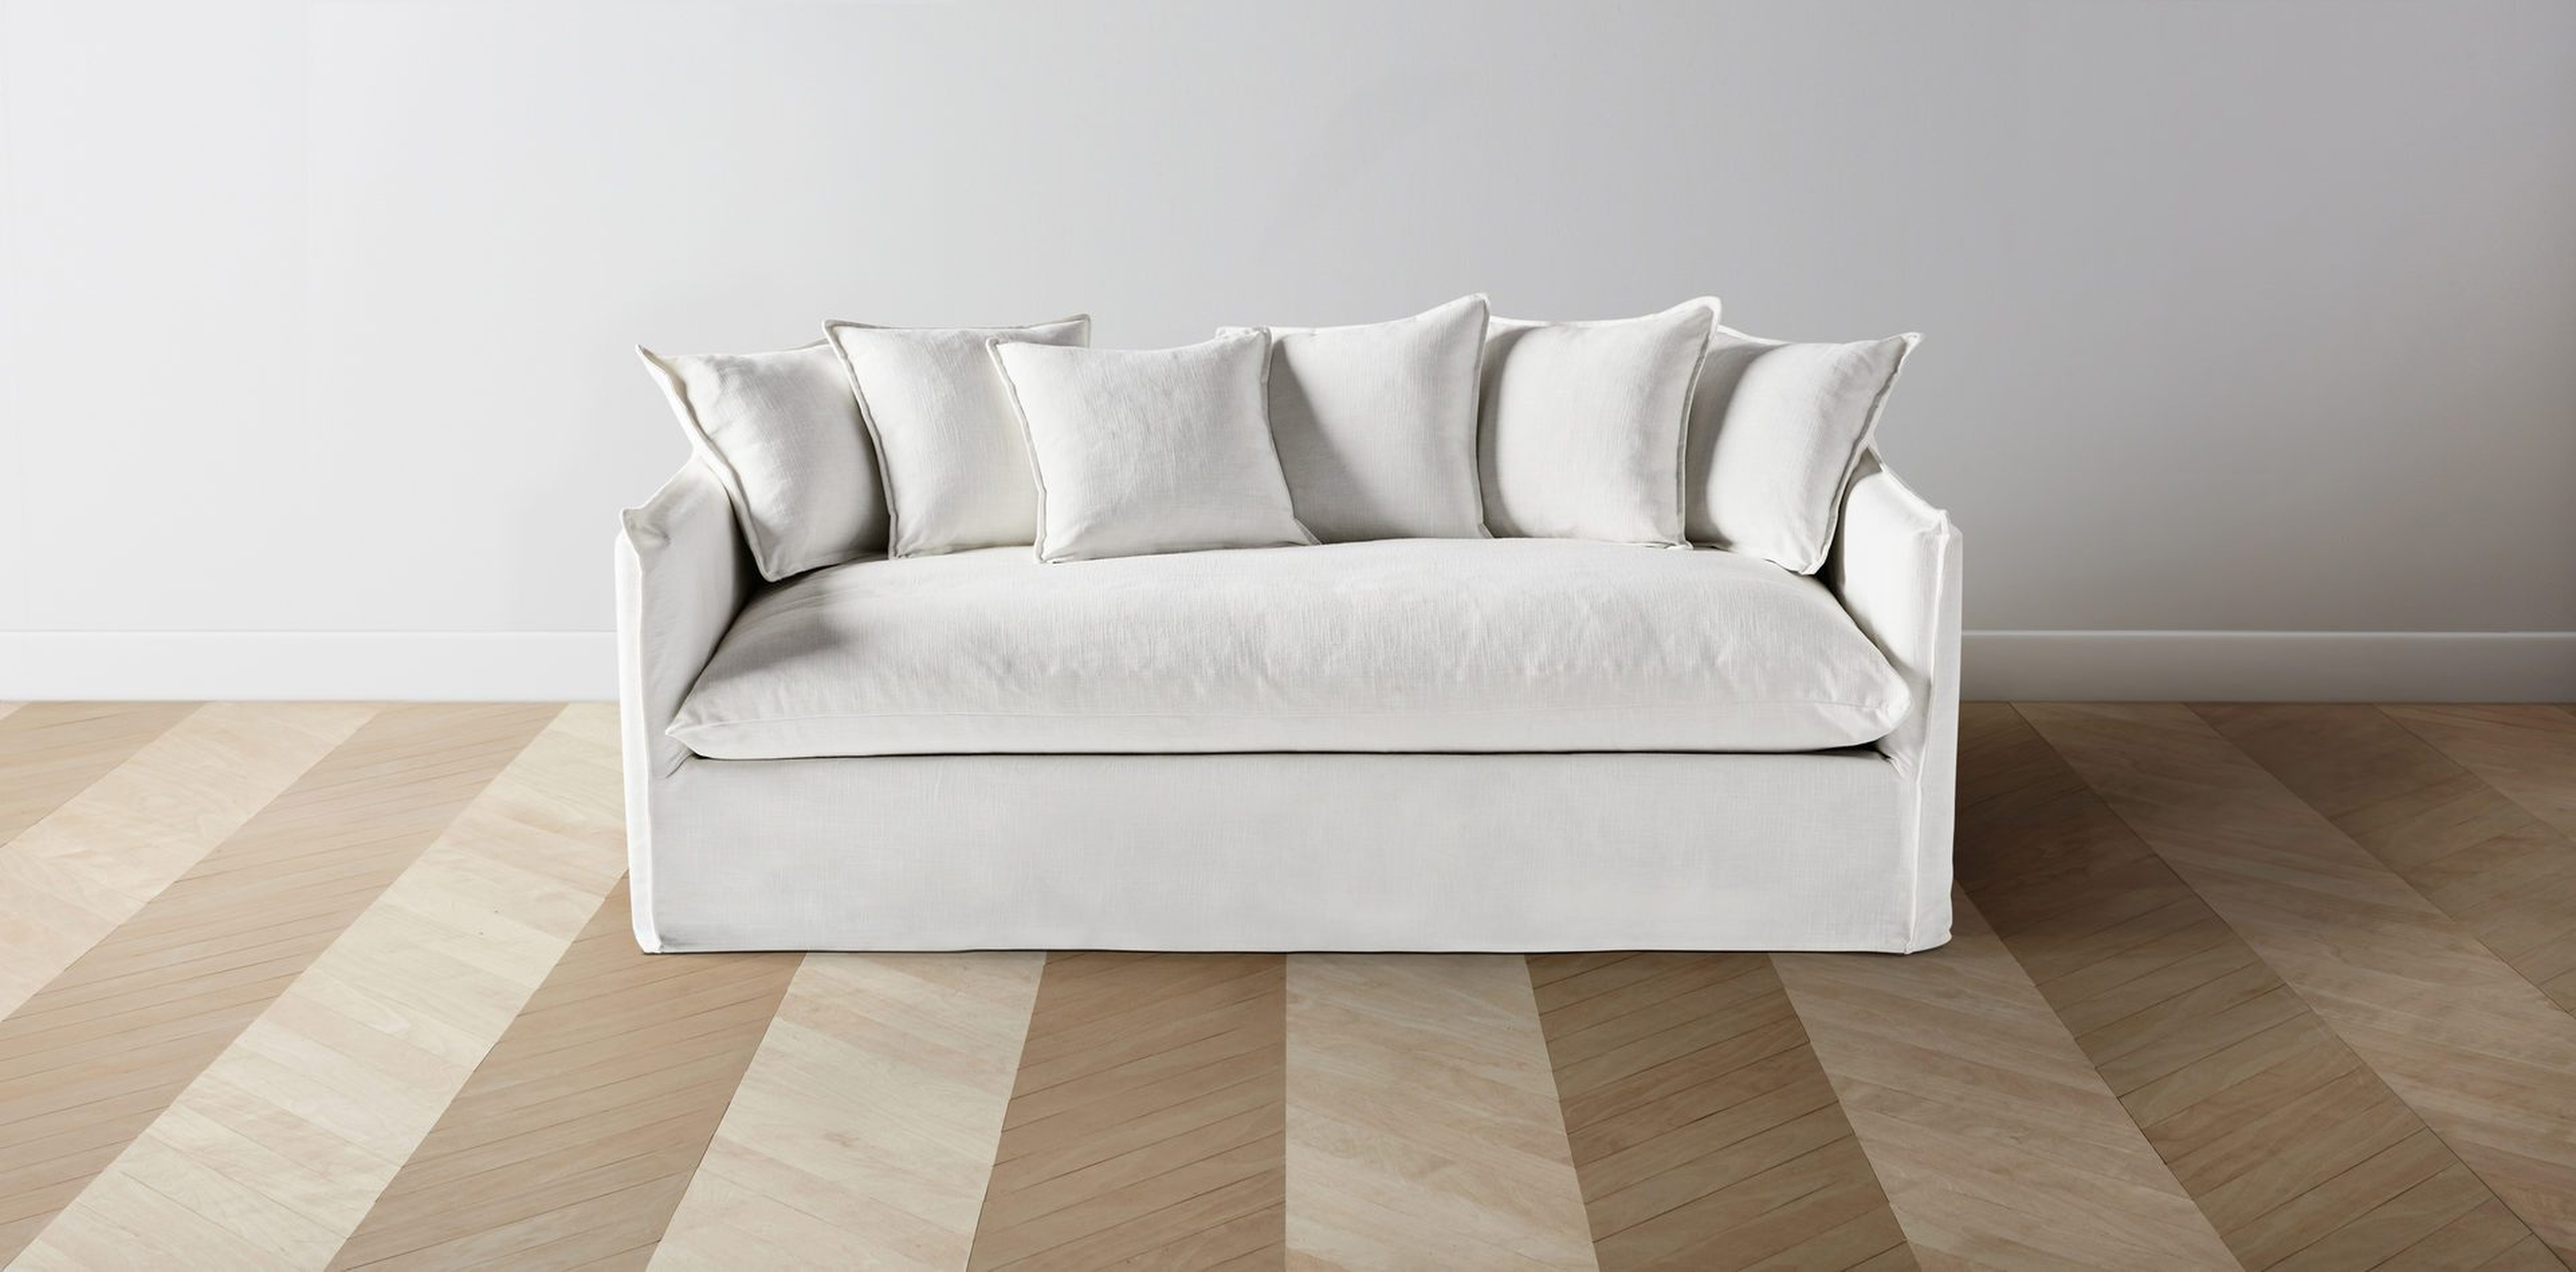 The Dune - Sofa 85" Wide - Maiden Home